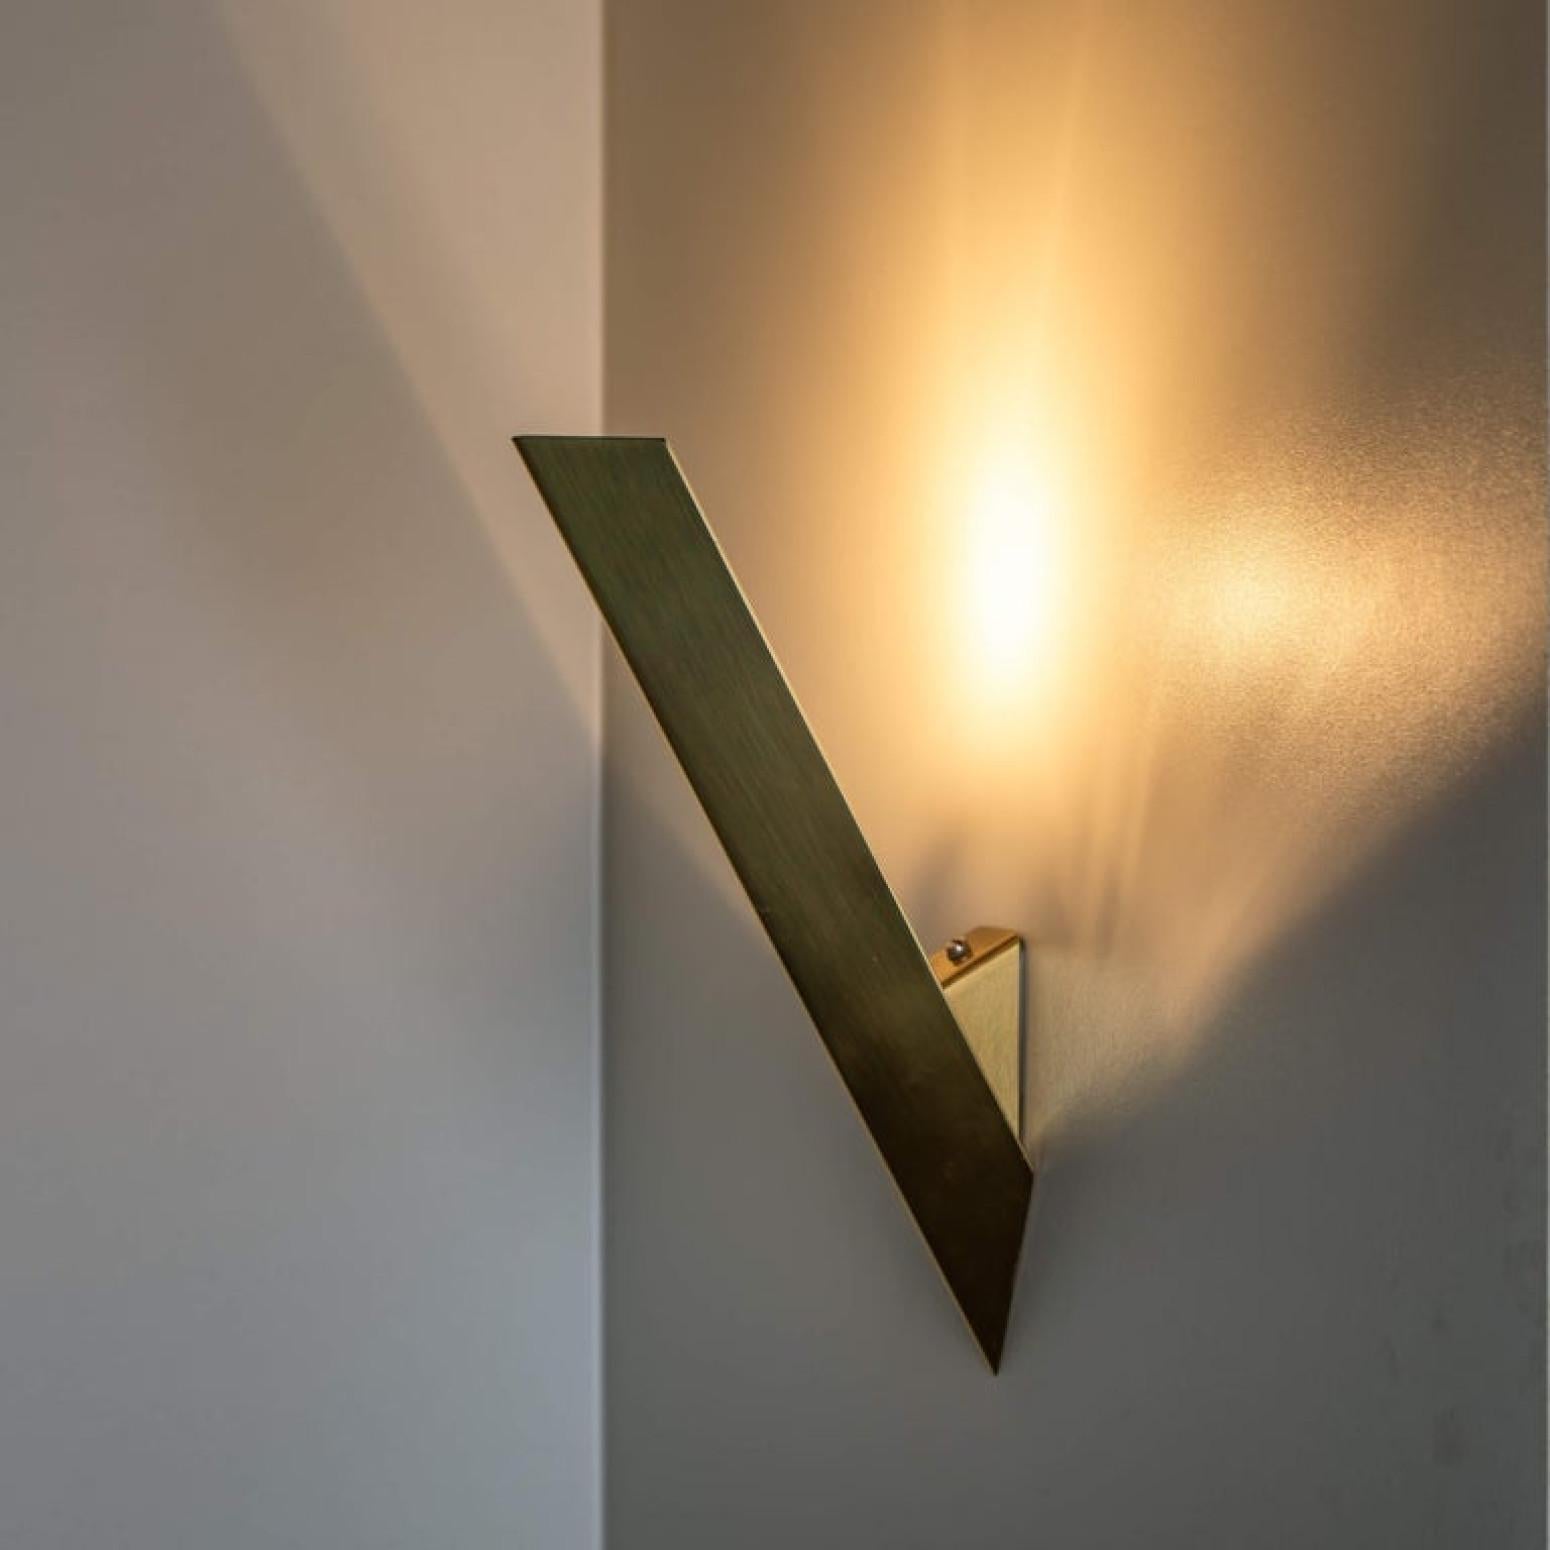 20th Century 1 of the 2 Pair of Wedge-Shaped High End Wall Lights by J.T. Kalmar, 1970s For Sale